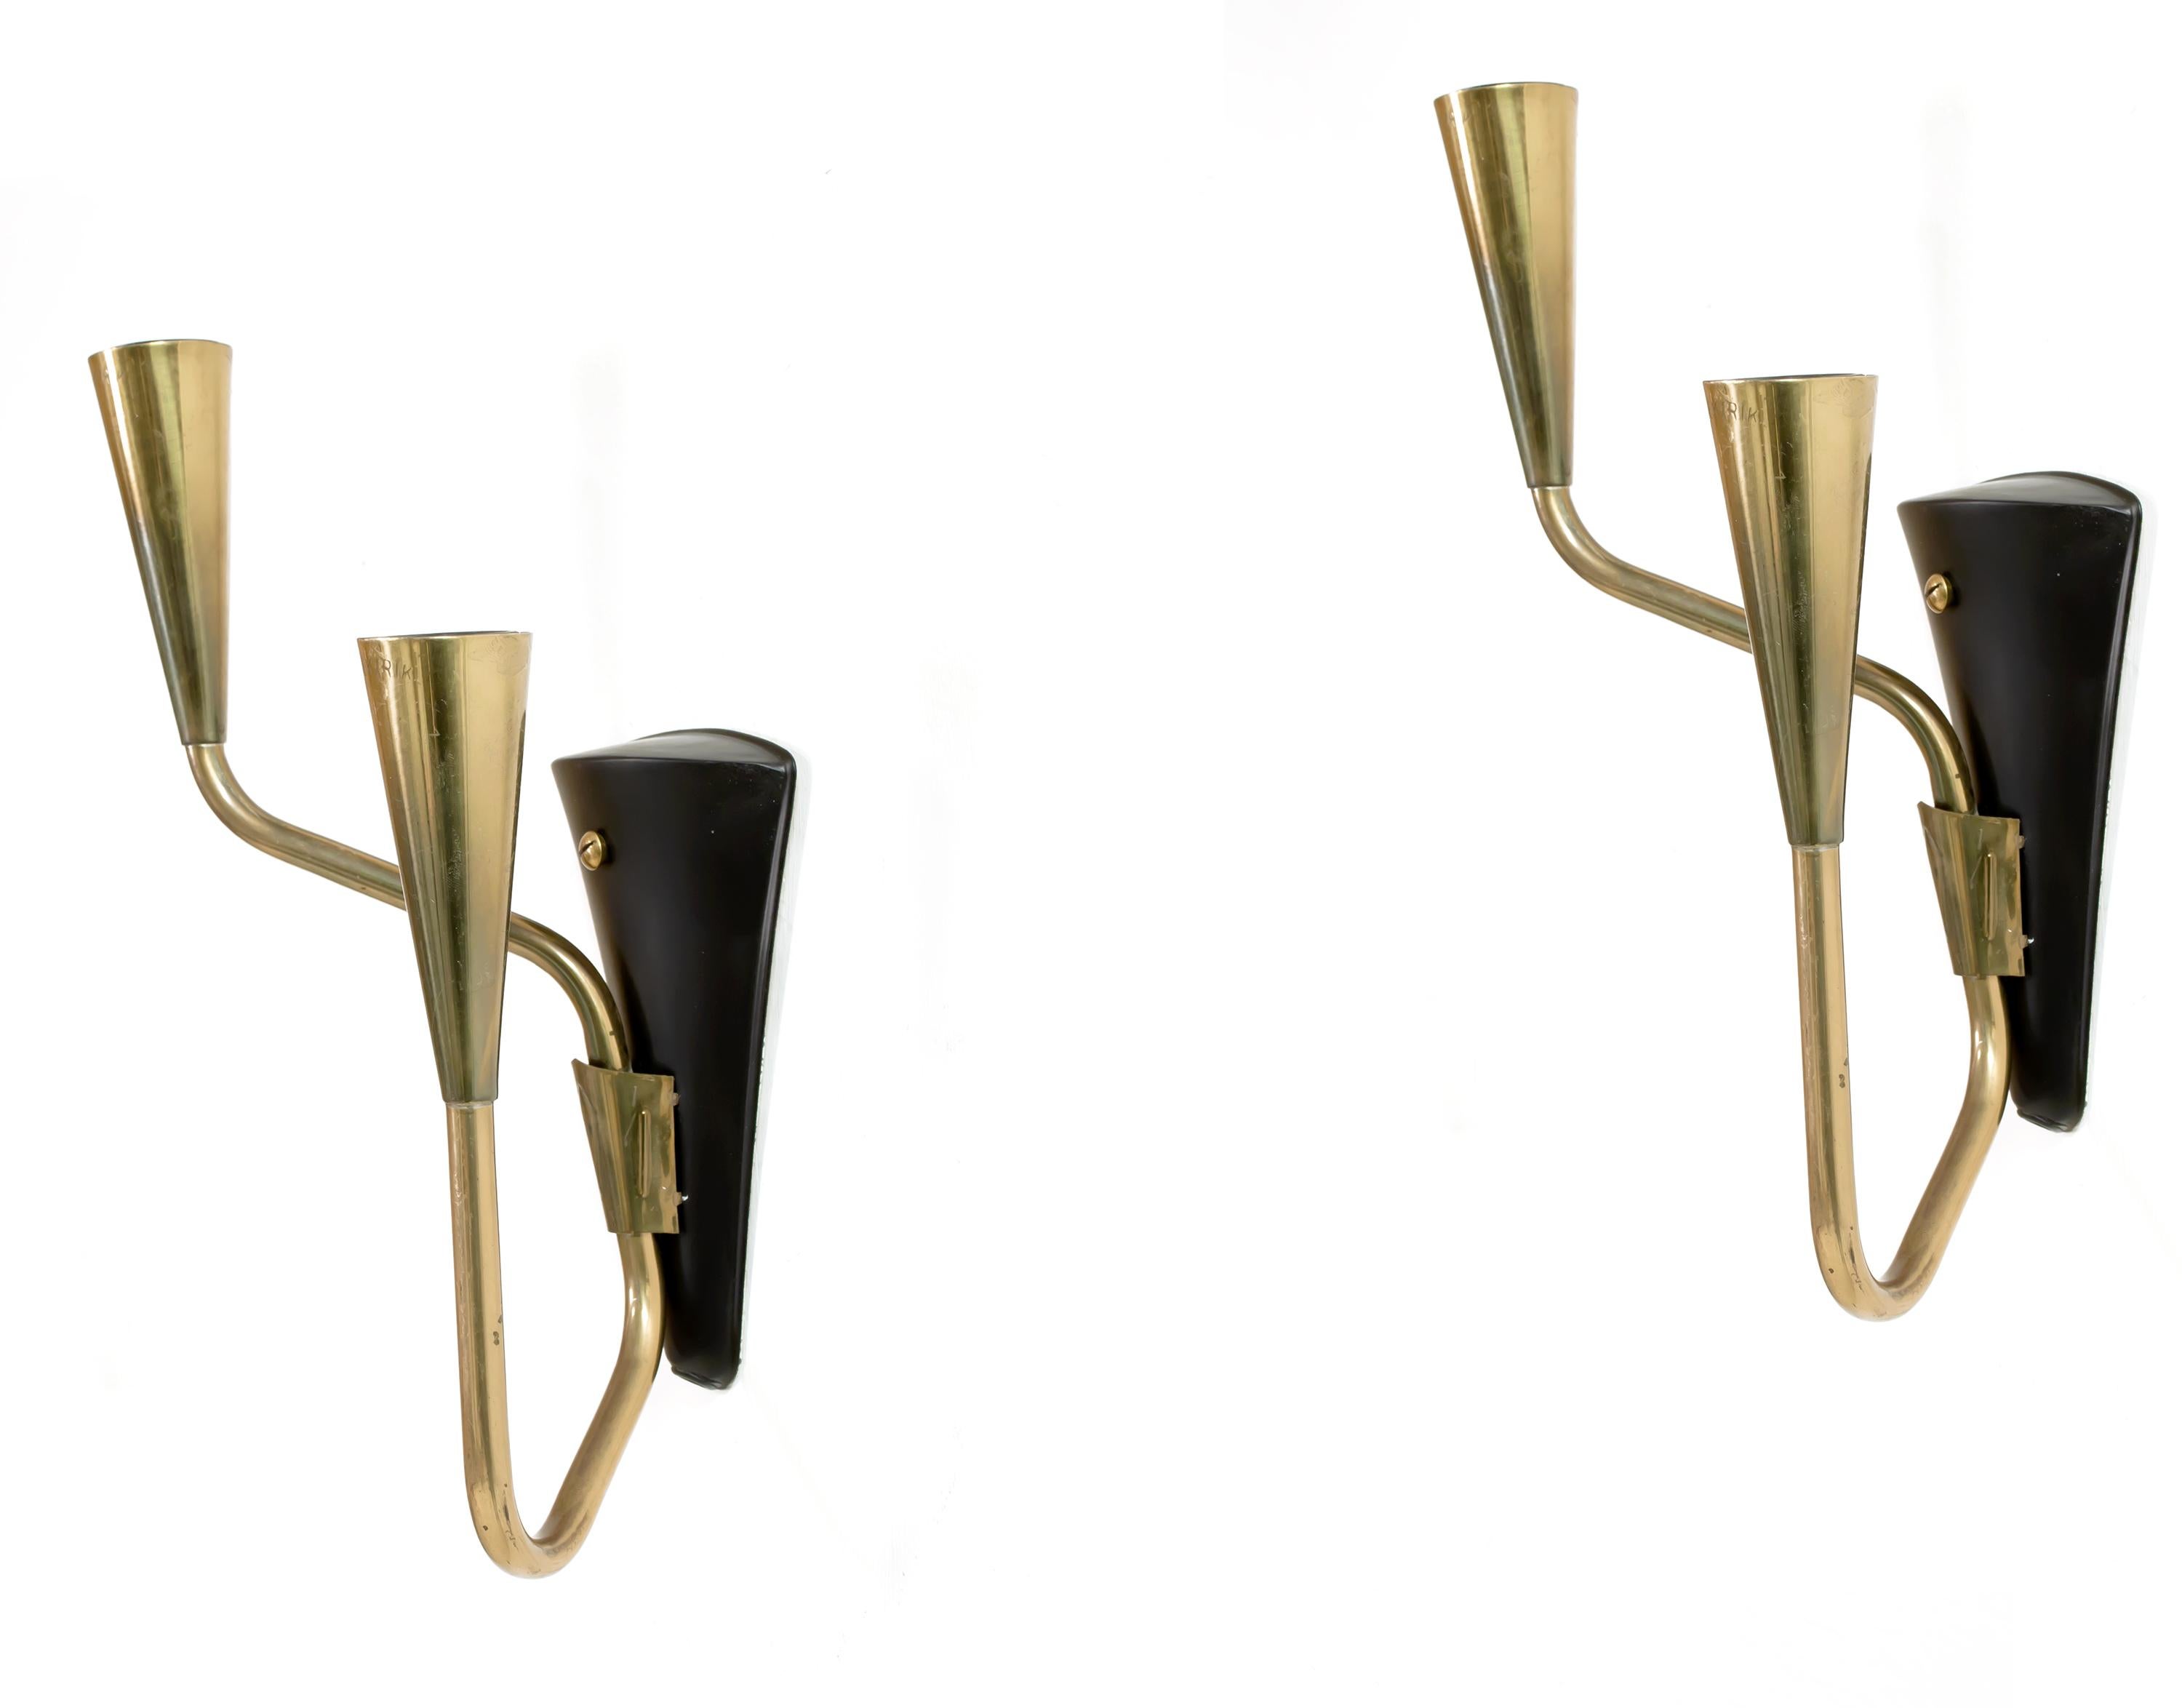 Sublime and Minimalist pair of wall lights in brass. Designed and made in Norway from circa 1960s first half by Elektrik AS. Both lamps are in very good vintage condition and fully working.